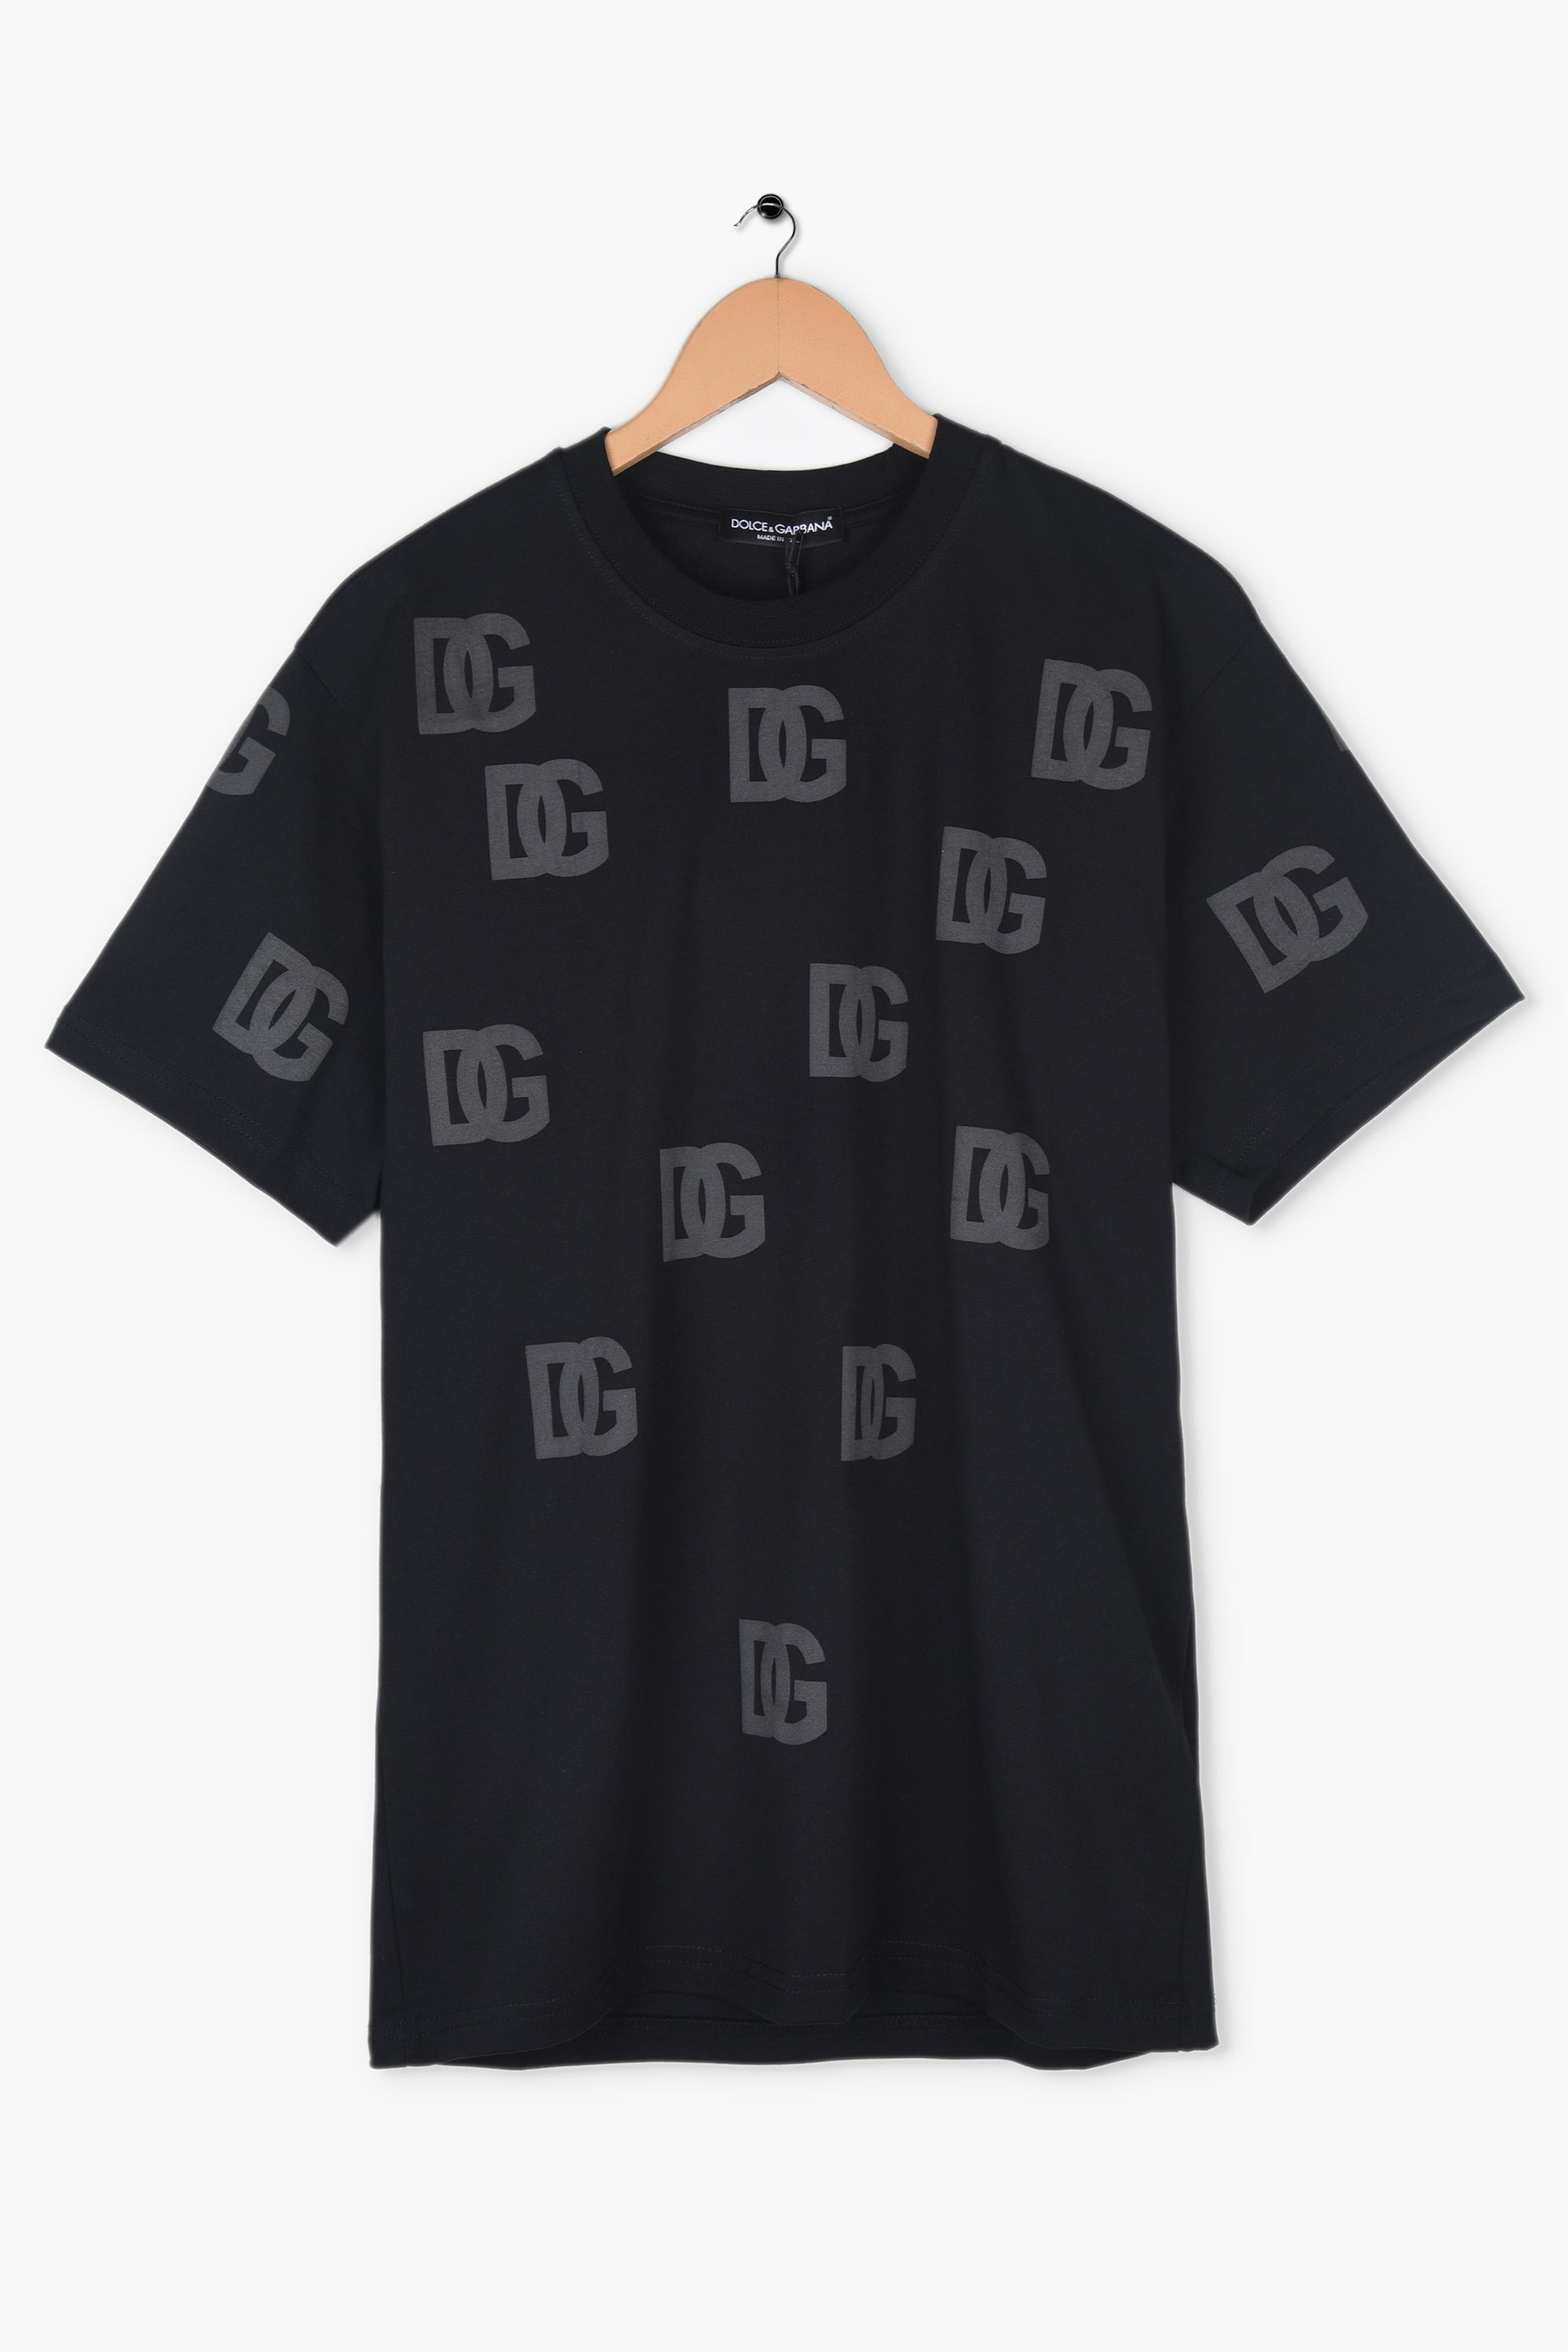 DG T-SHIRT WITH ALL OVER DG LOGO PRINT